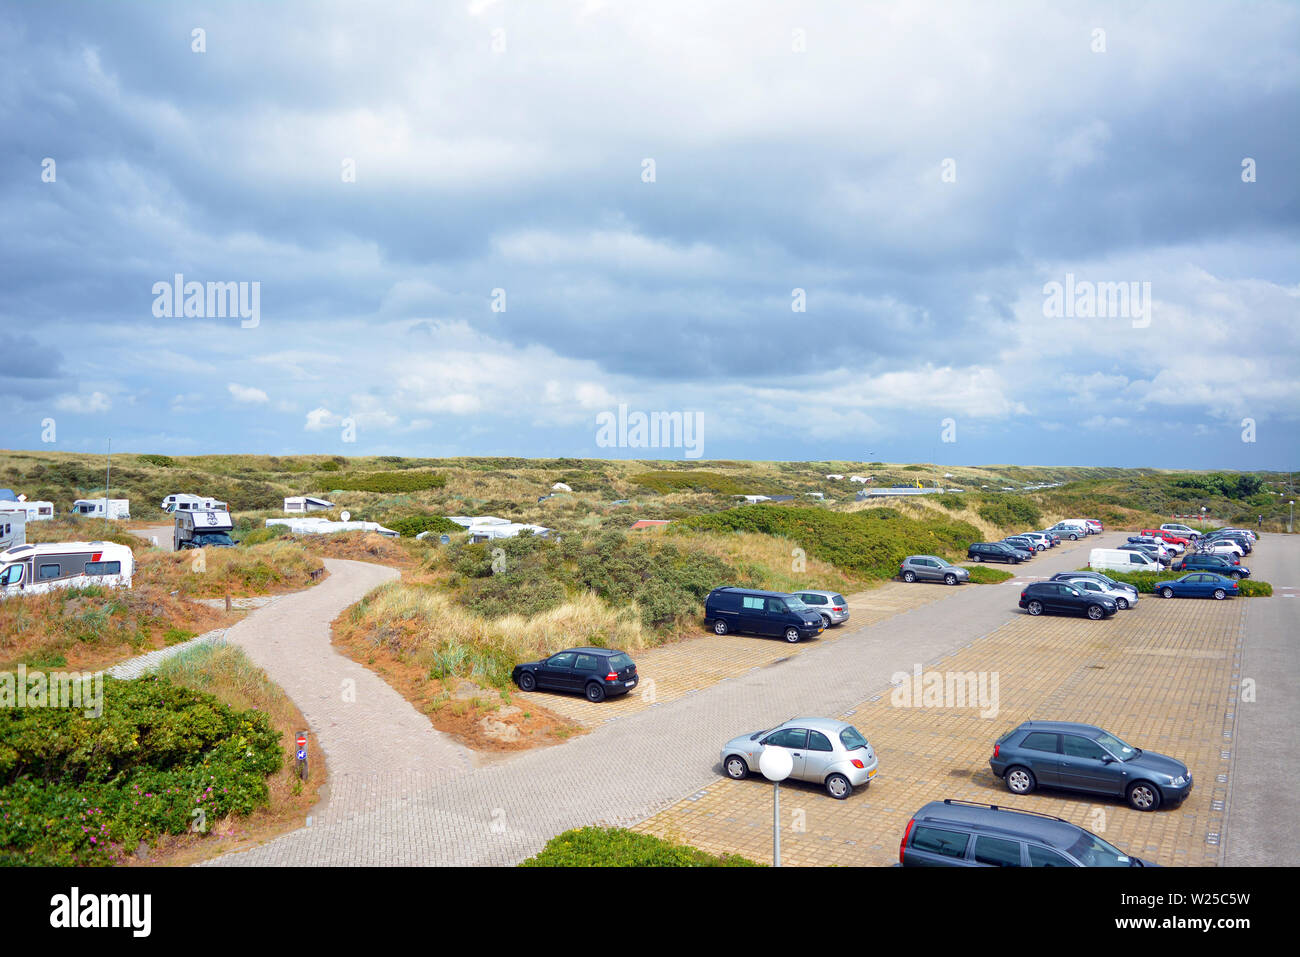 Camping site with big car parking space called 'Kogerstrand' in the dunes near beach in Texel, Holland Stock Photo